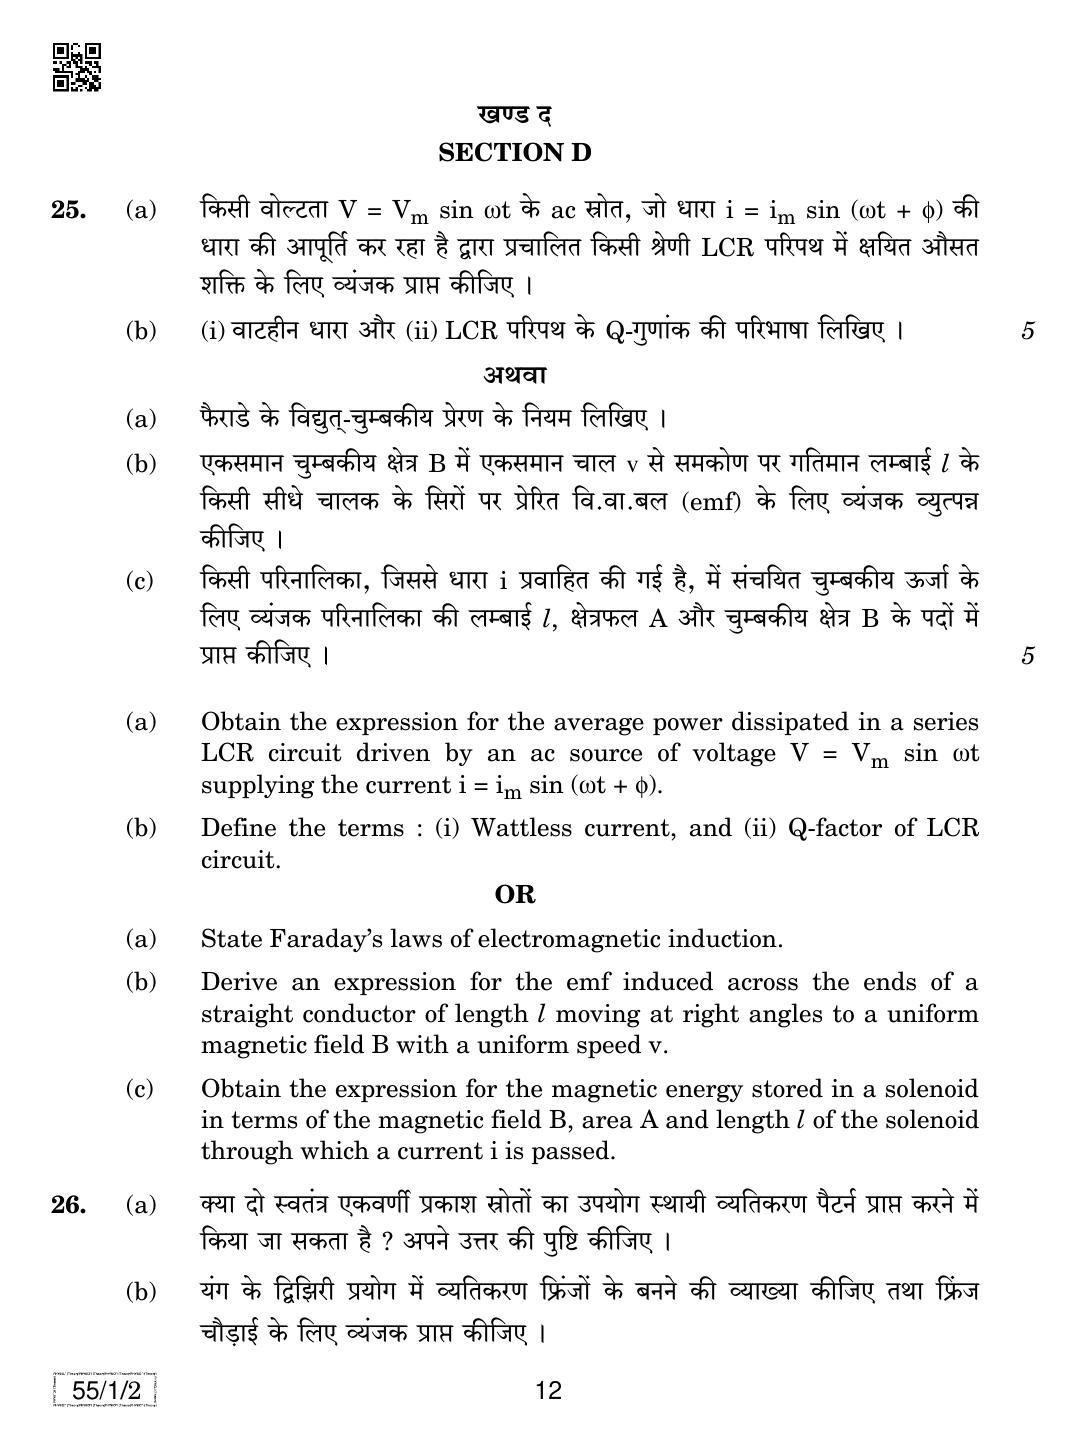 CBSE Class 12 55-1-2 PHYSICS 2019 Compartment Question Paper - Page 12